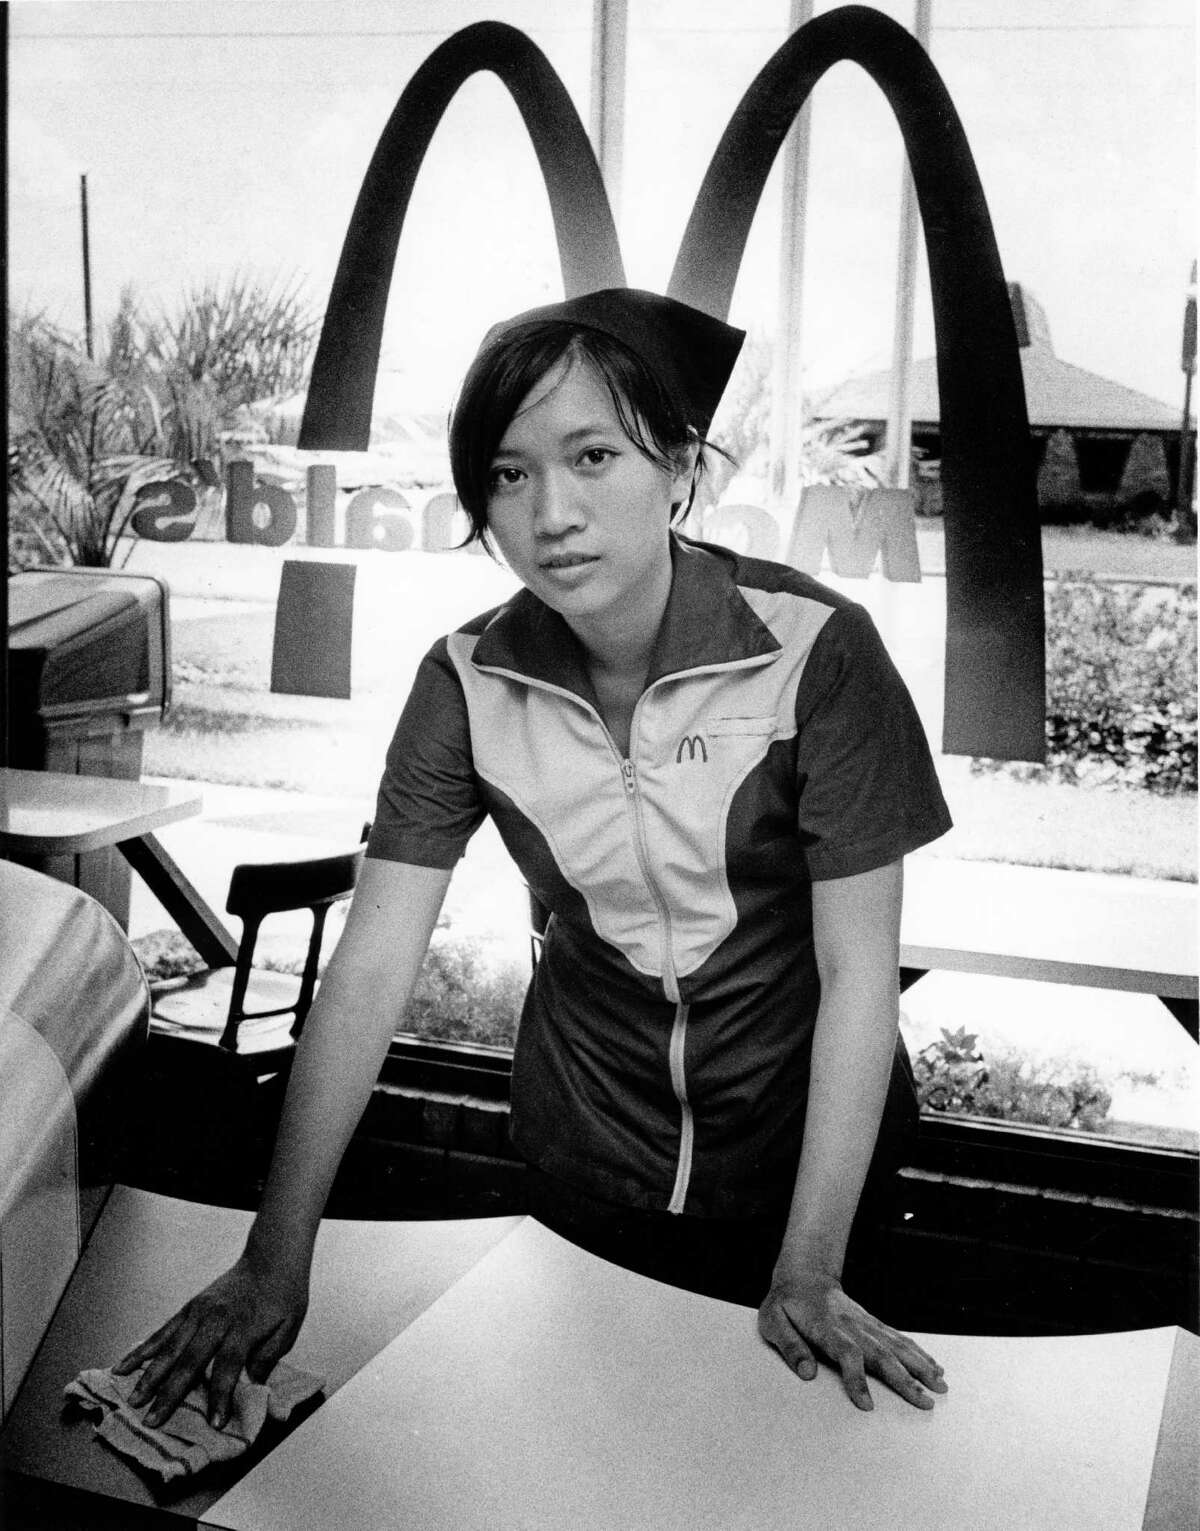 08/16/1975 - Tran Dam, 18, just started her job selling hamburgers at a southwest Houston McDonald's. She and her family came to Houston in July 1975.